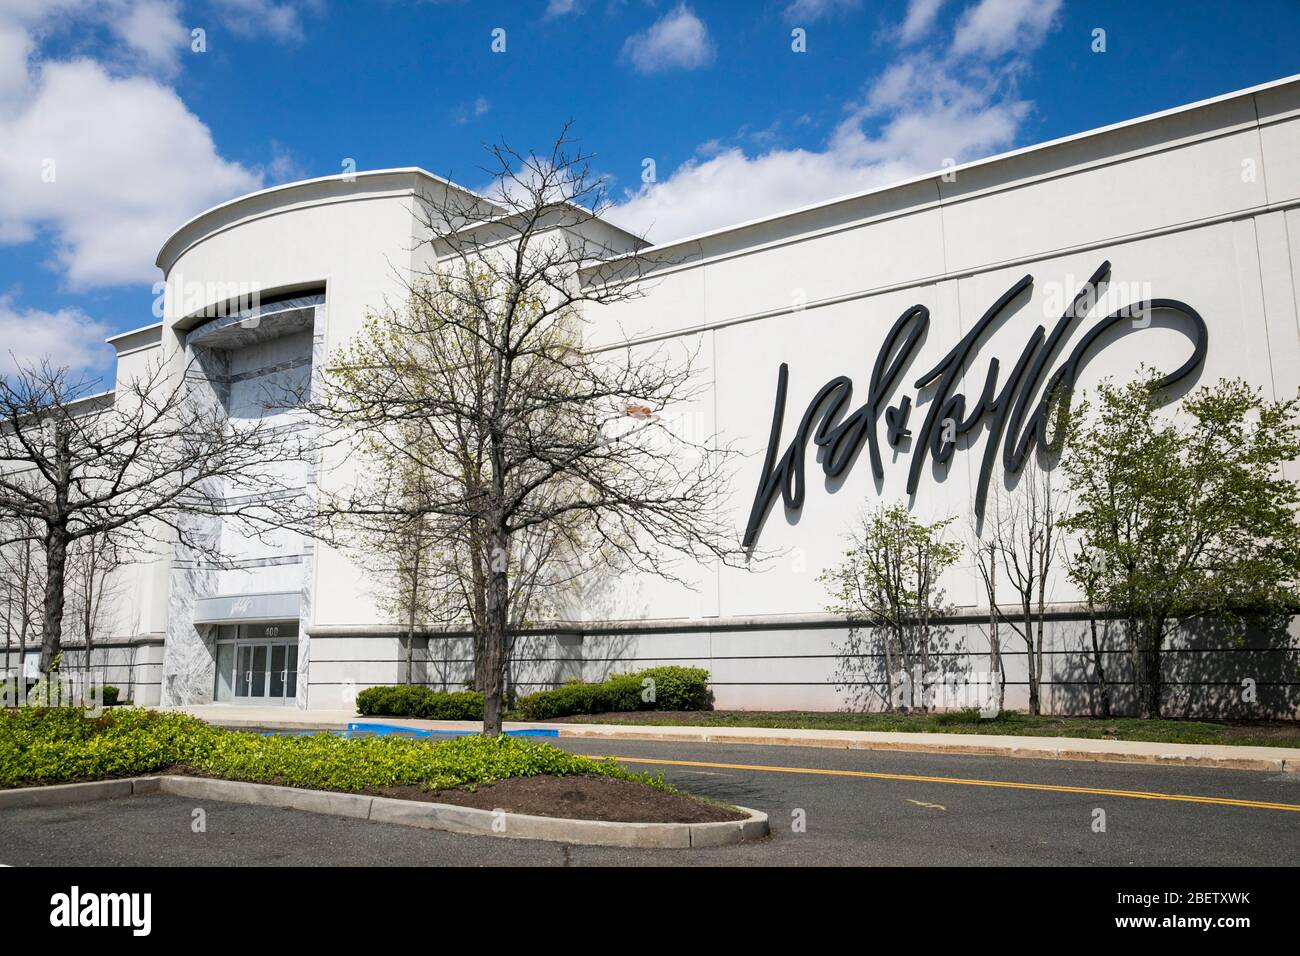 Lord and Taylor Clothing Store at Woodfield Mall Editorial Stock Photo -  Image of city, america: 128805803